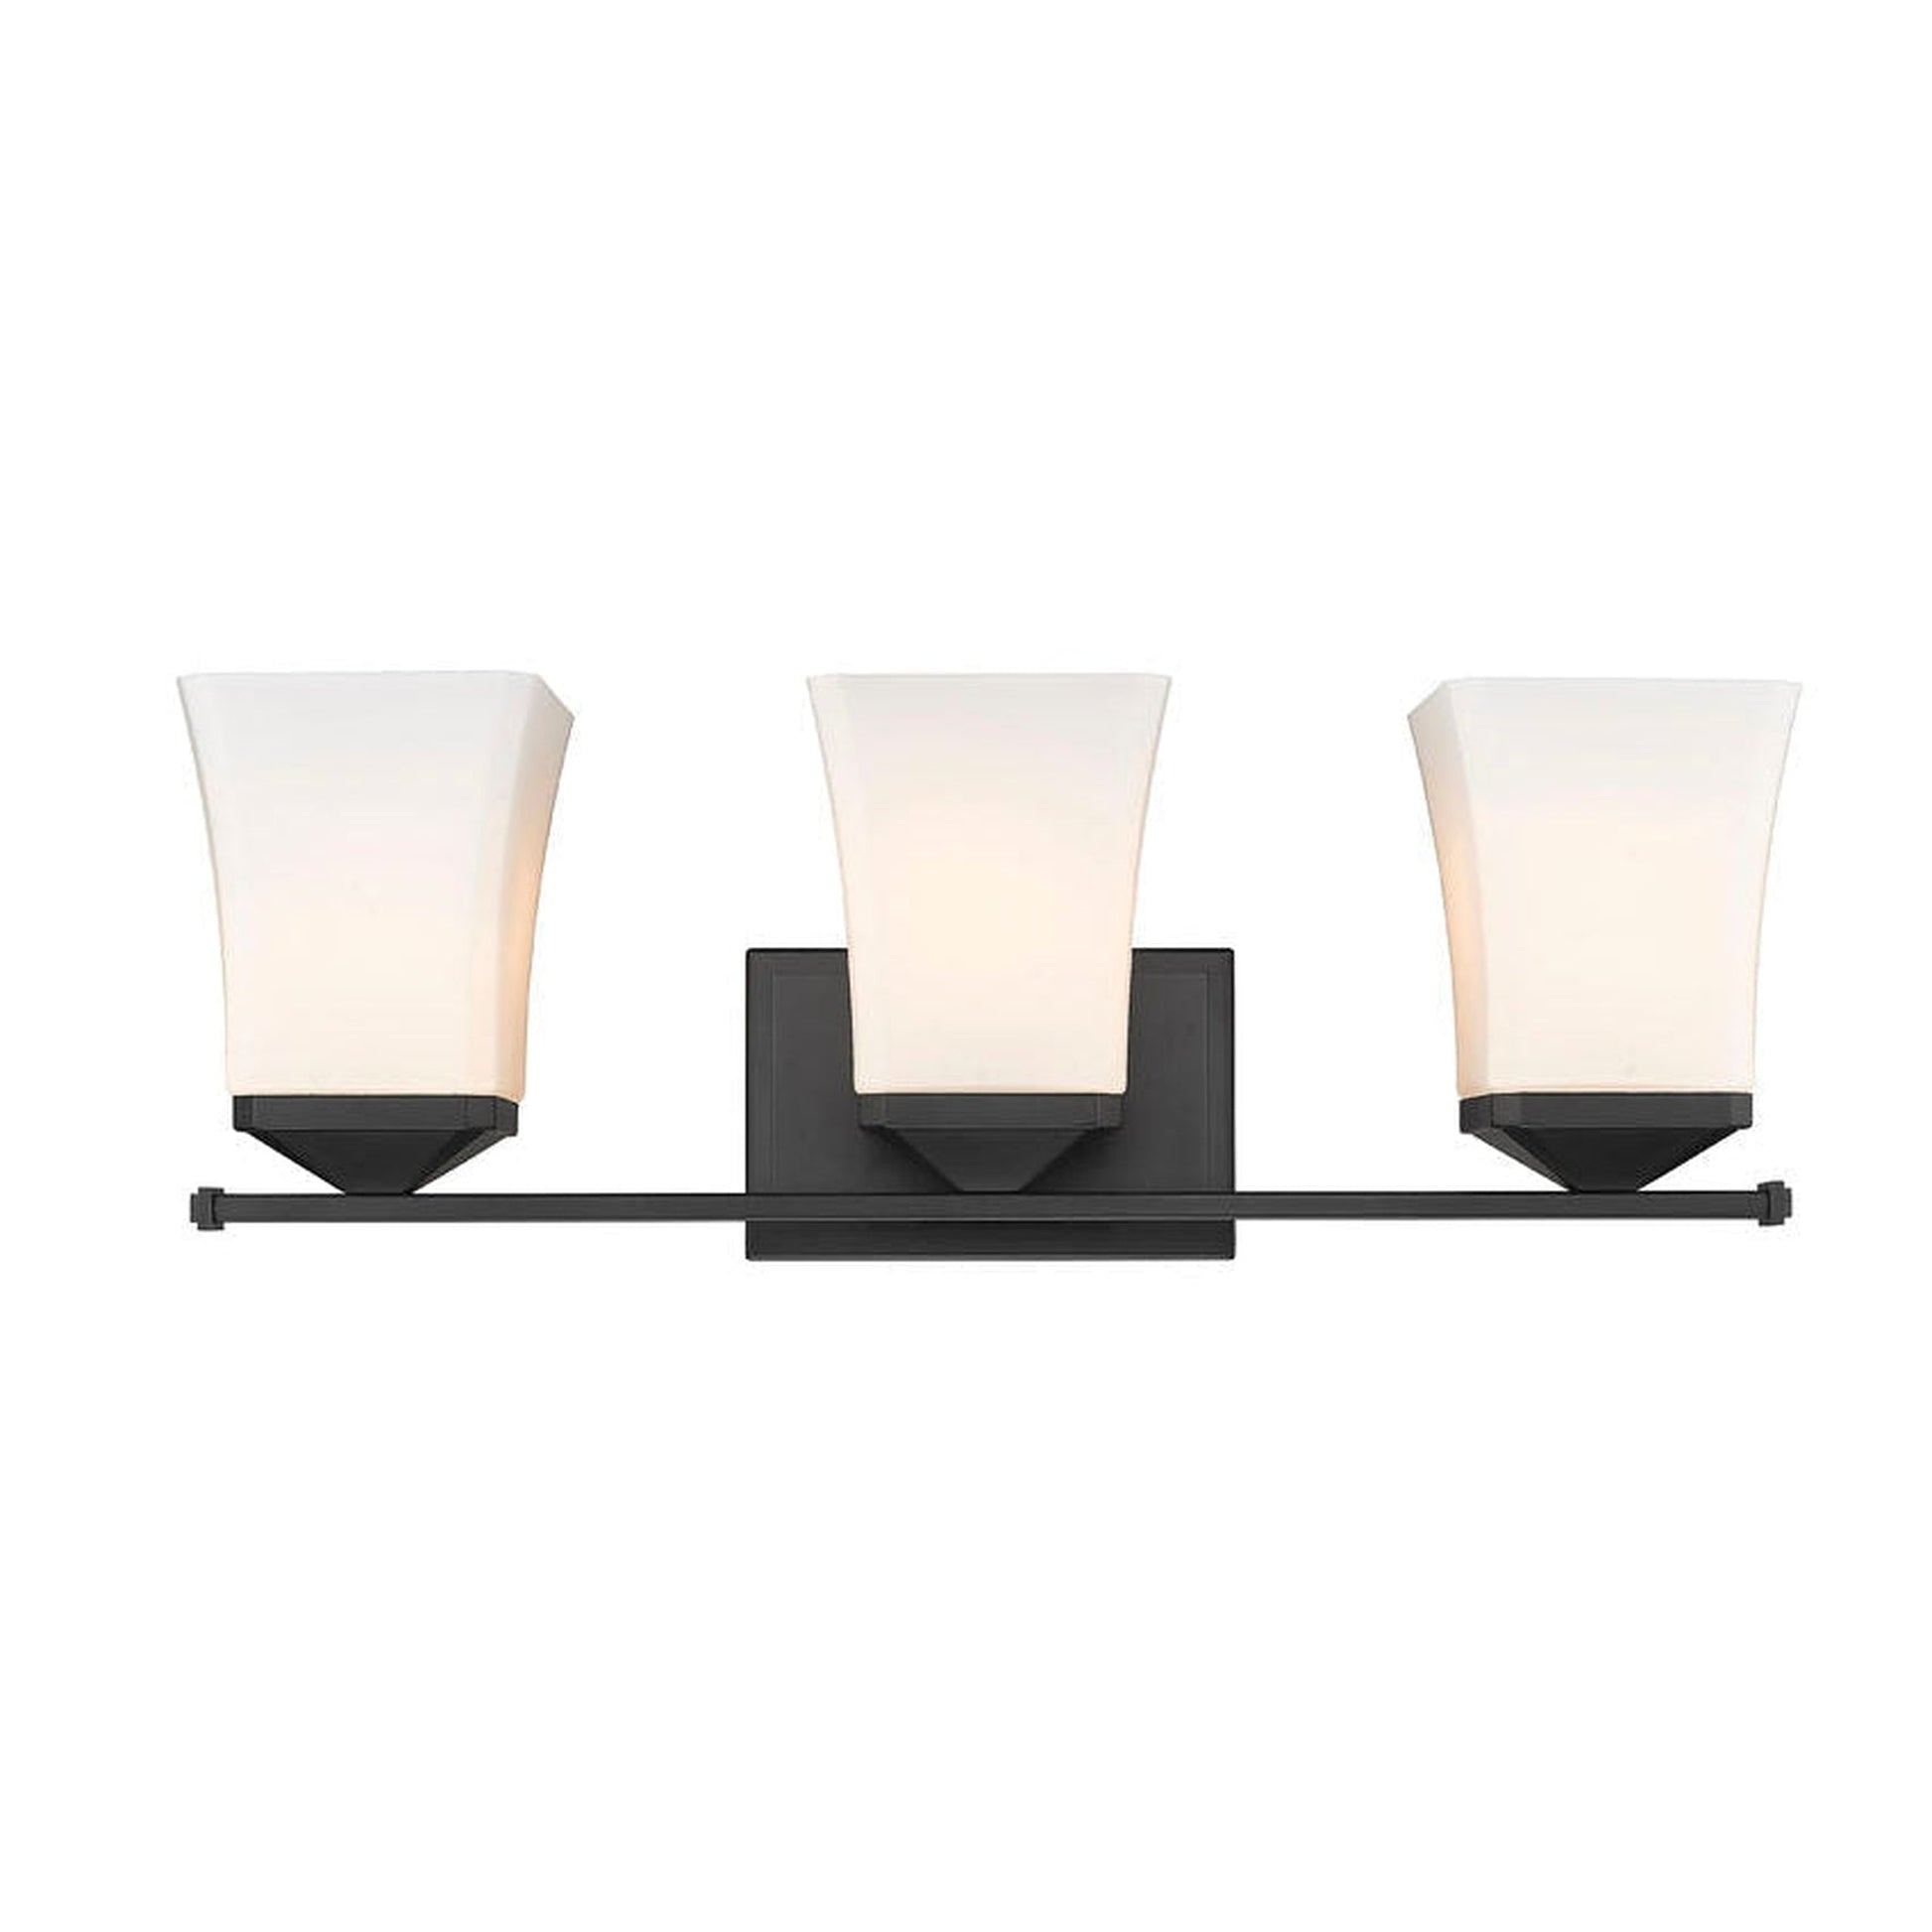 Z-Lite Darcy 22" 3-Light Matte Black Vanity Light With Etched Opal Glass Shade